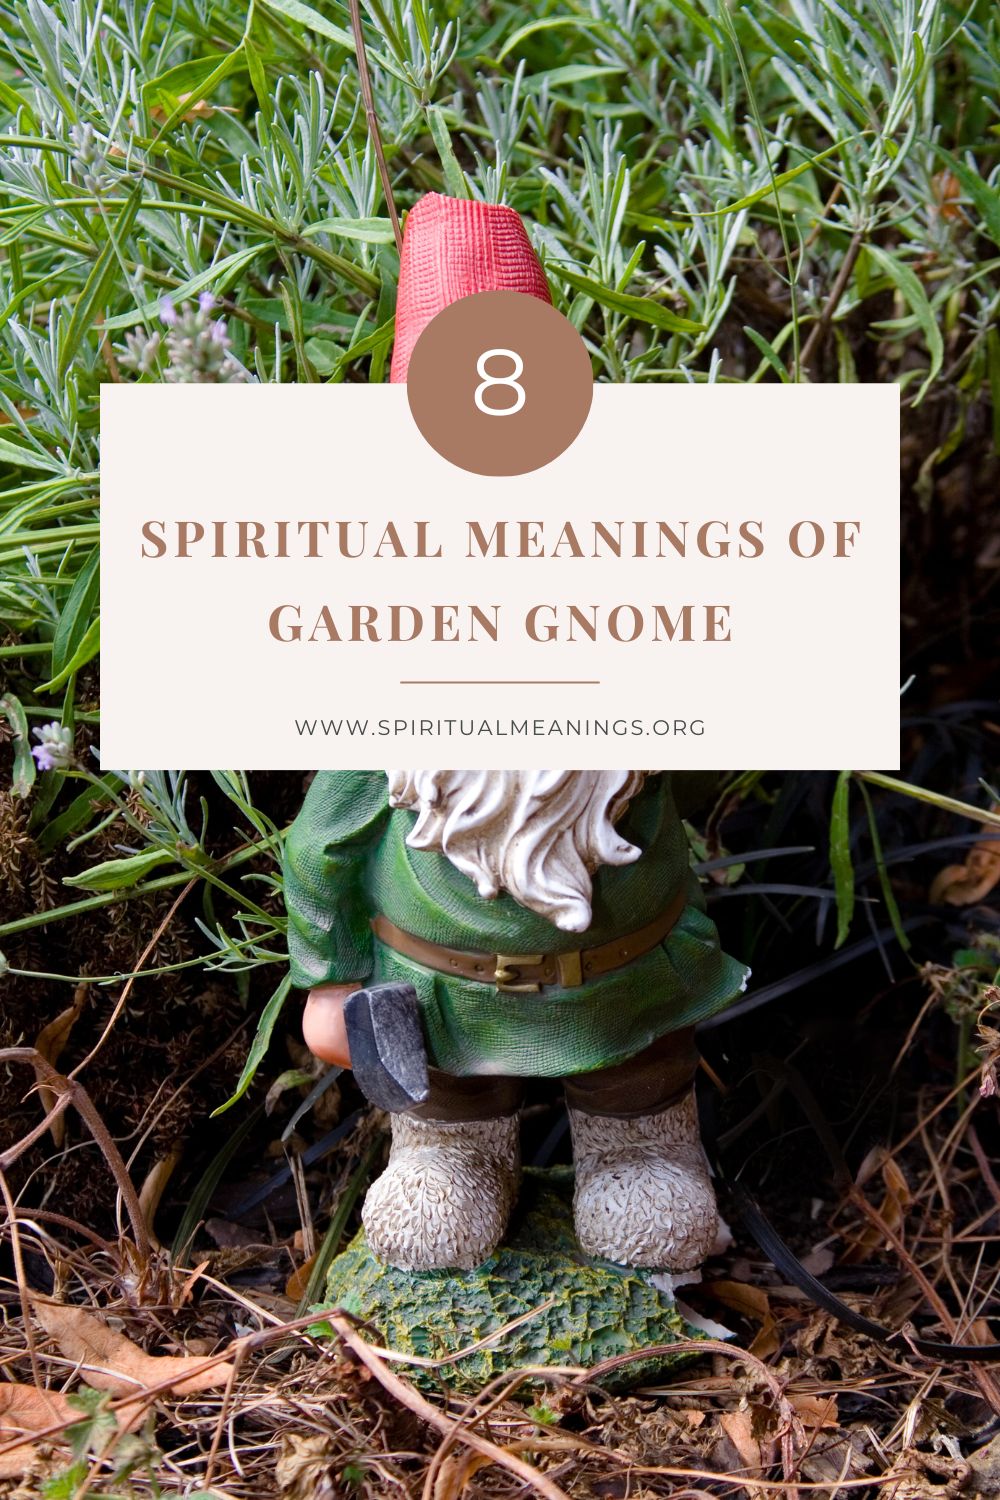 Garden gnomes mean many things to different people